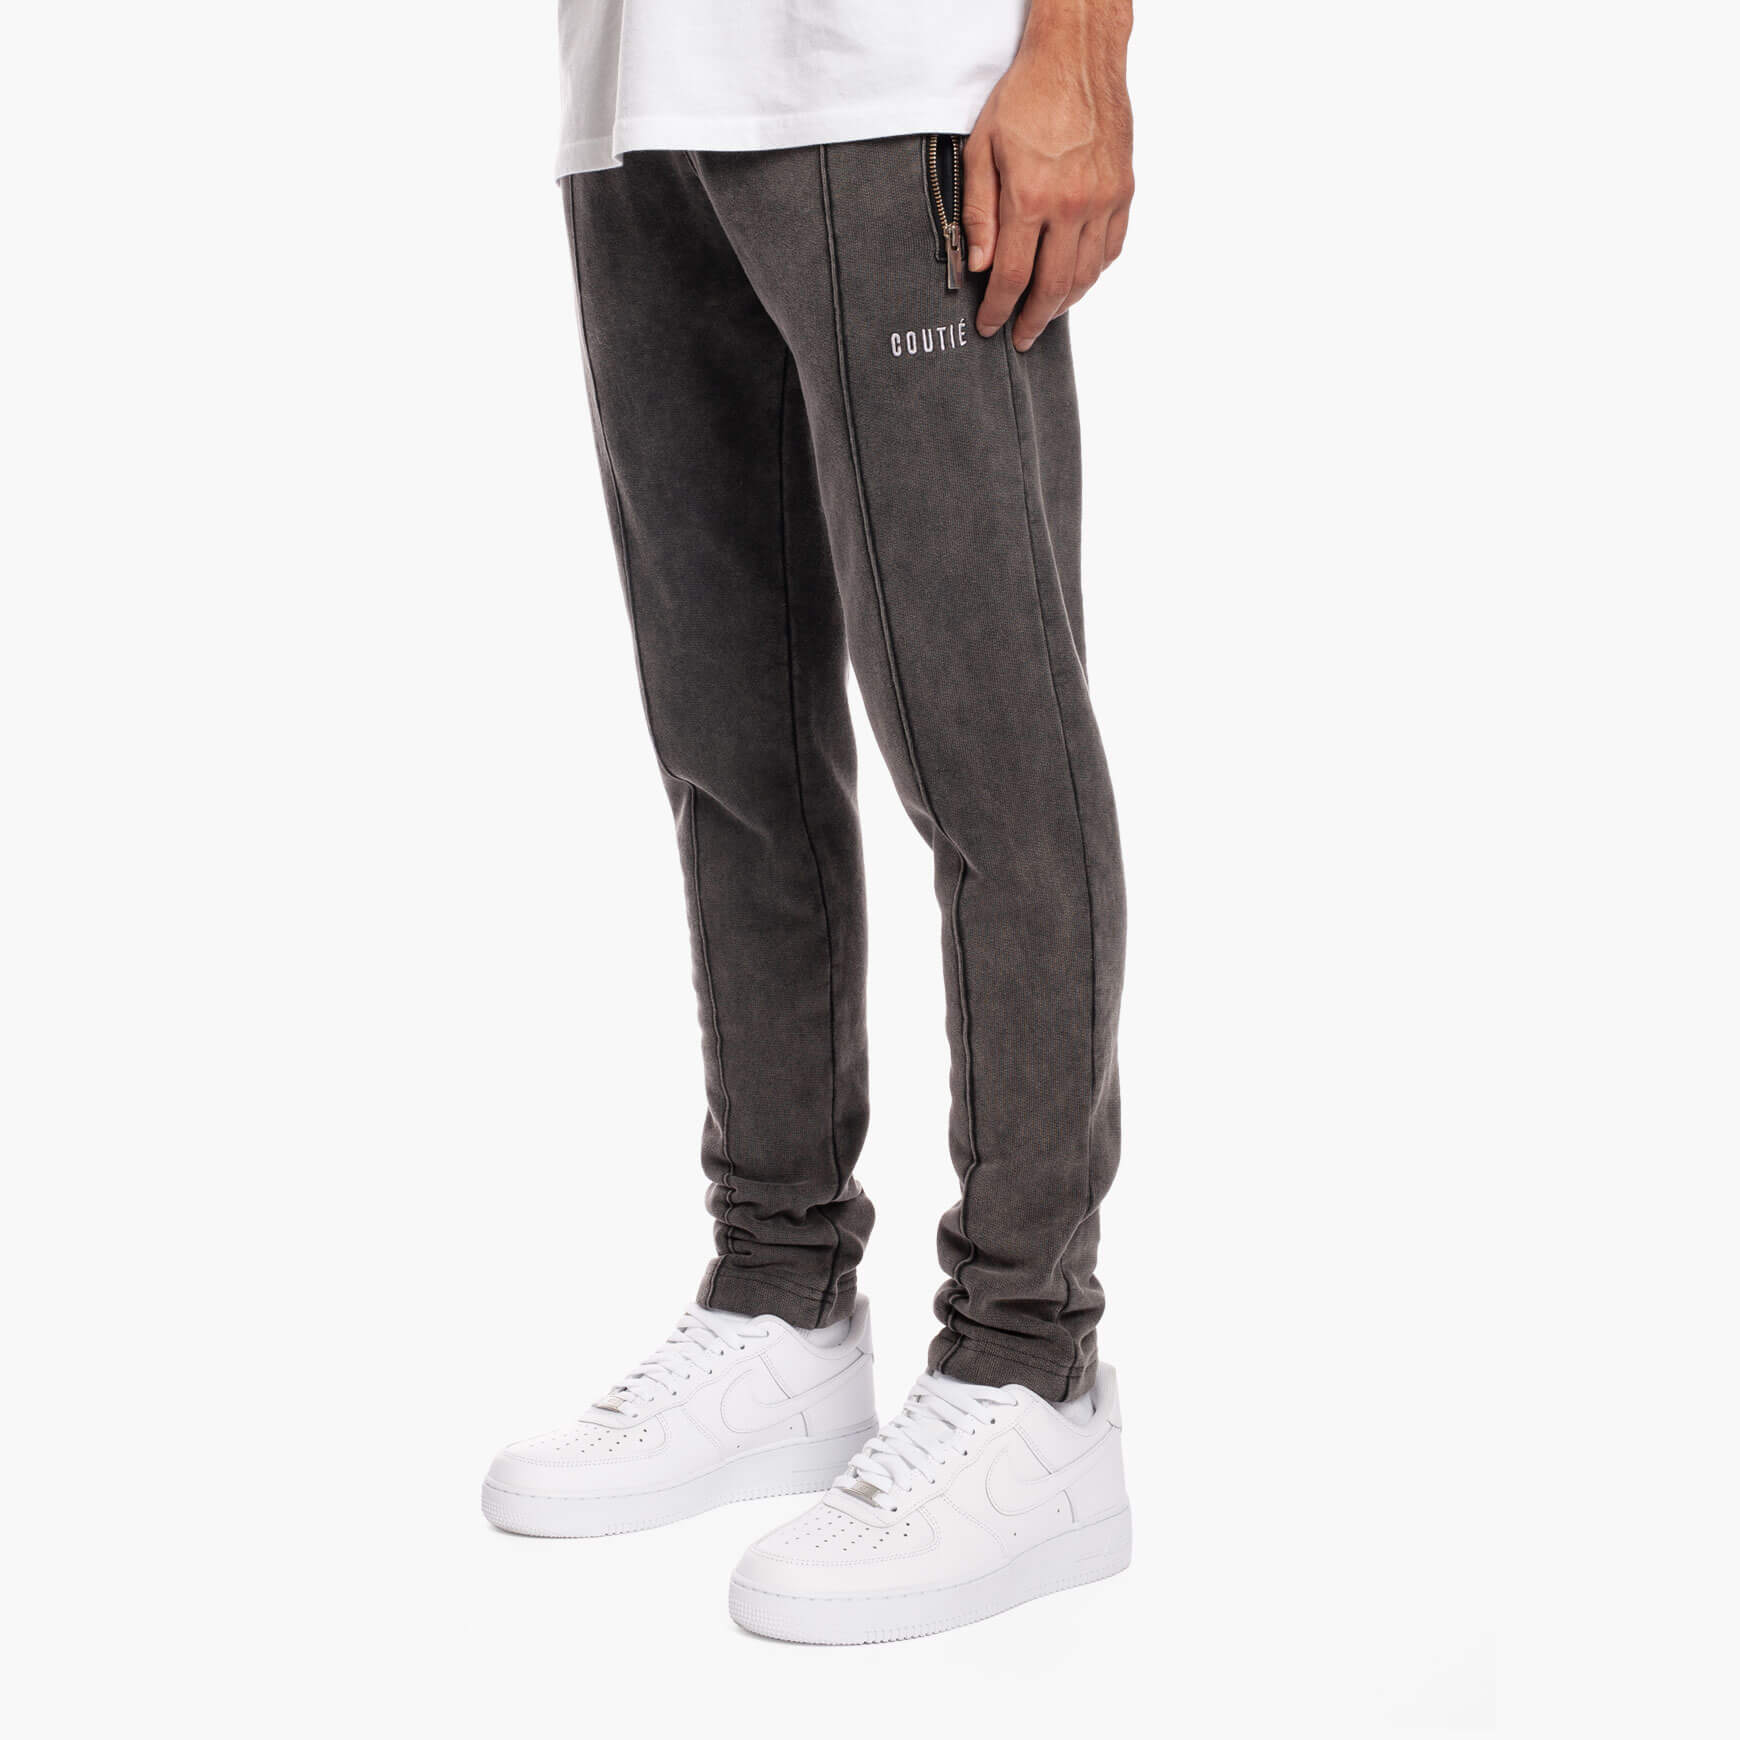 Pleated Sweat Pant Charcoal